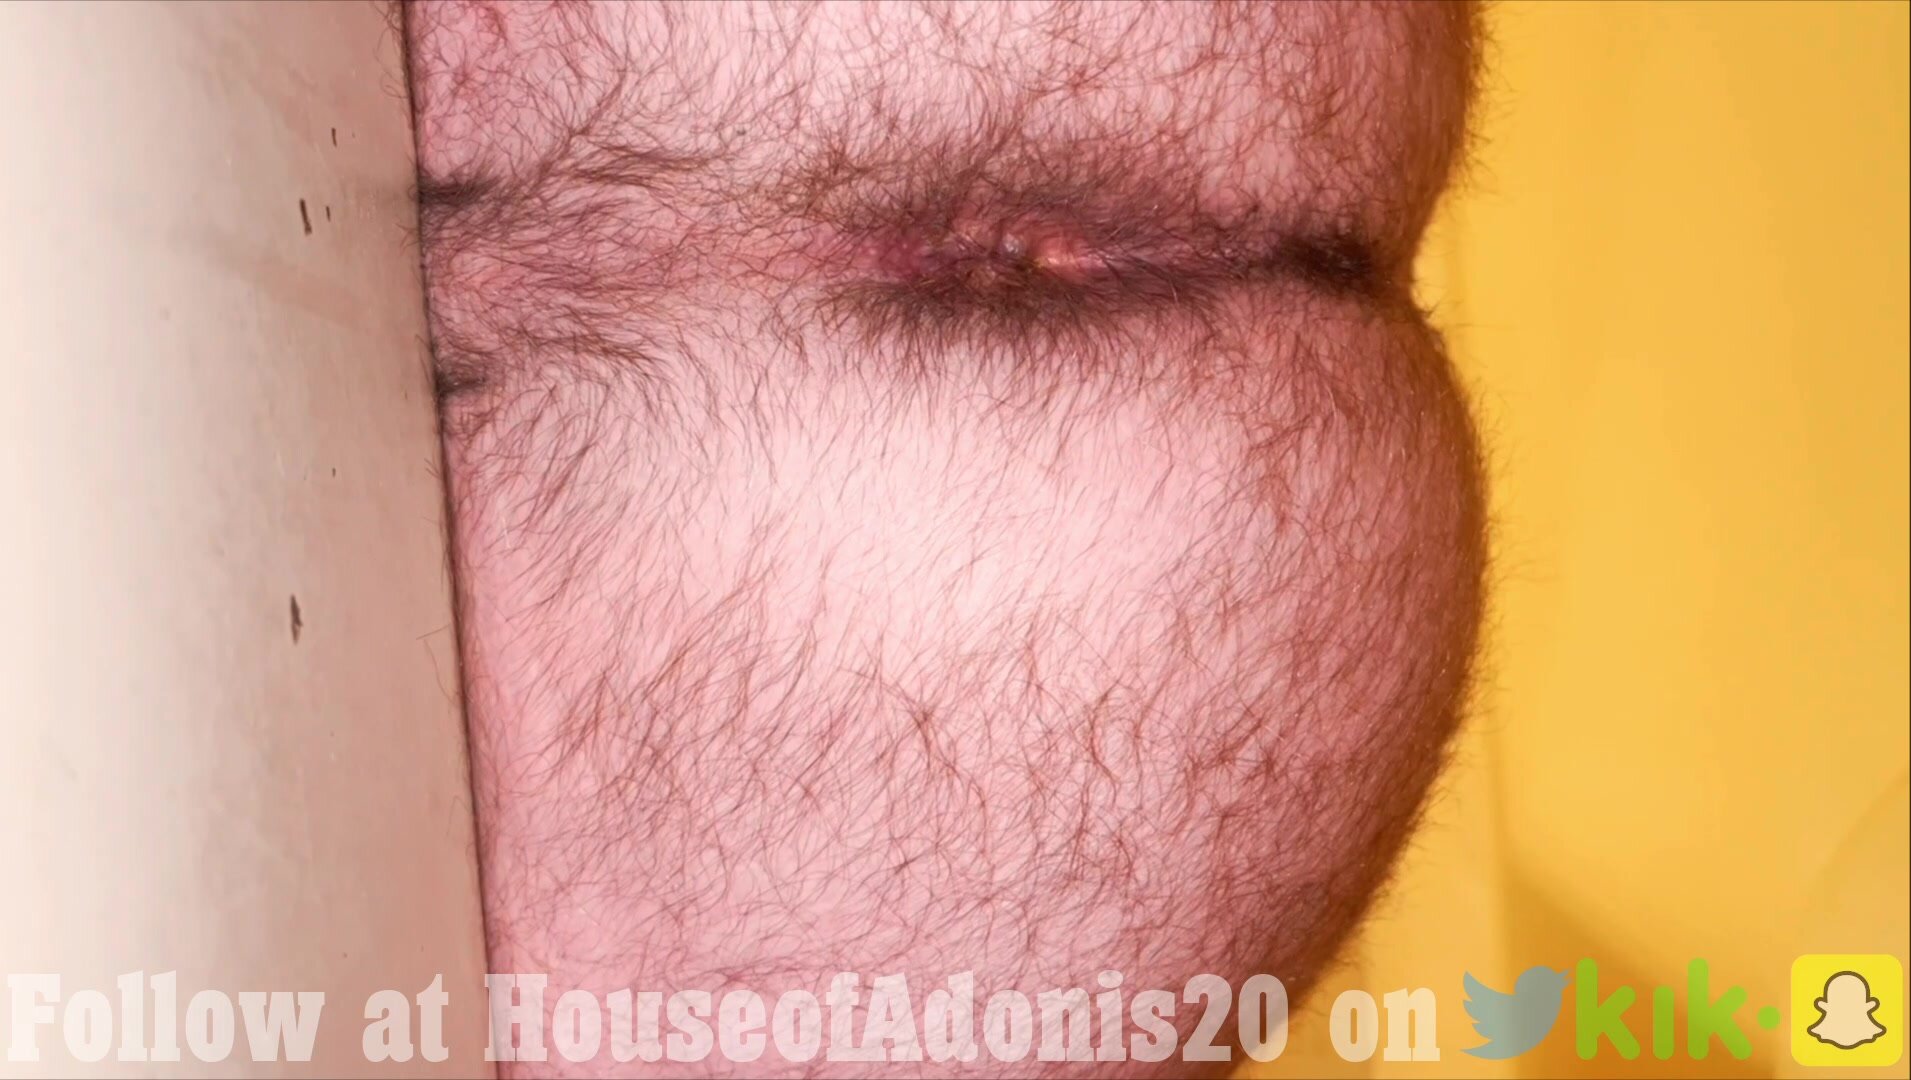 Hairy Asshole Close-Up Farts w/ Burps